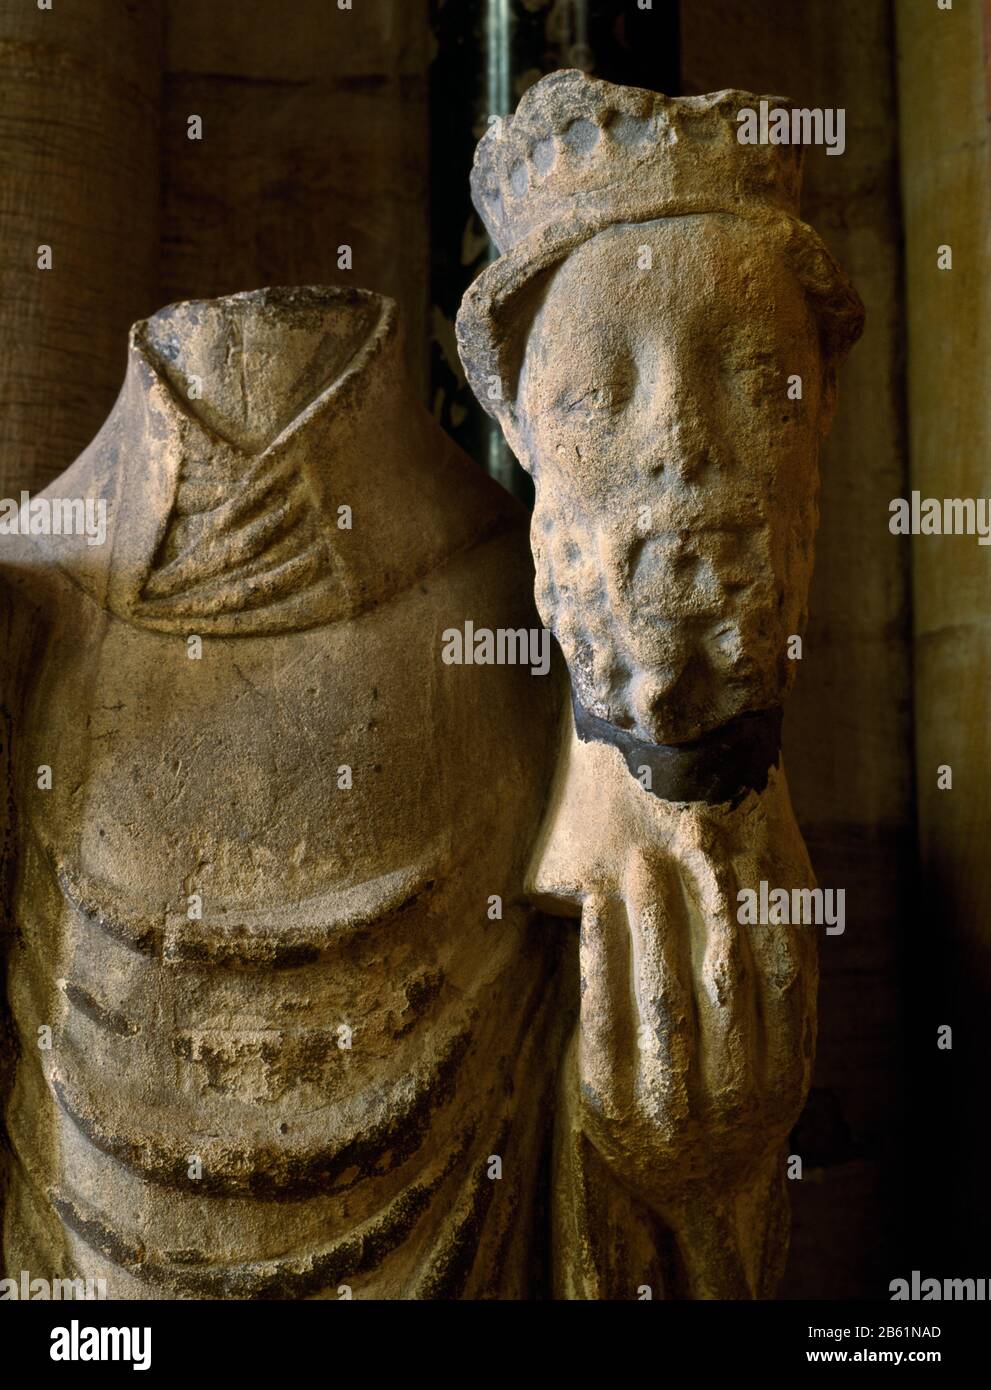 A damaged statue, removed from a niche in the central tower of Durham Cathedral, England, UK, of St Cuthbert holding the head of A-S king St Oswald. Stock Photo